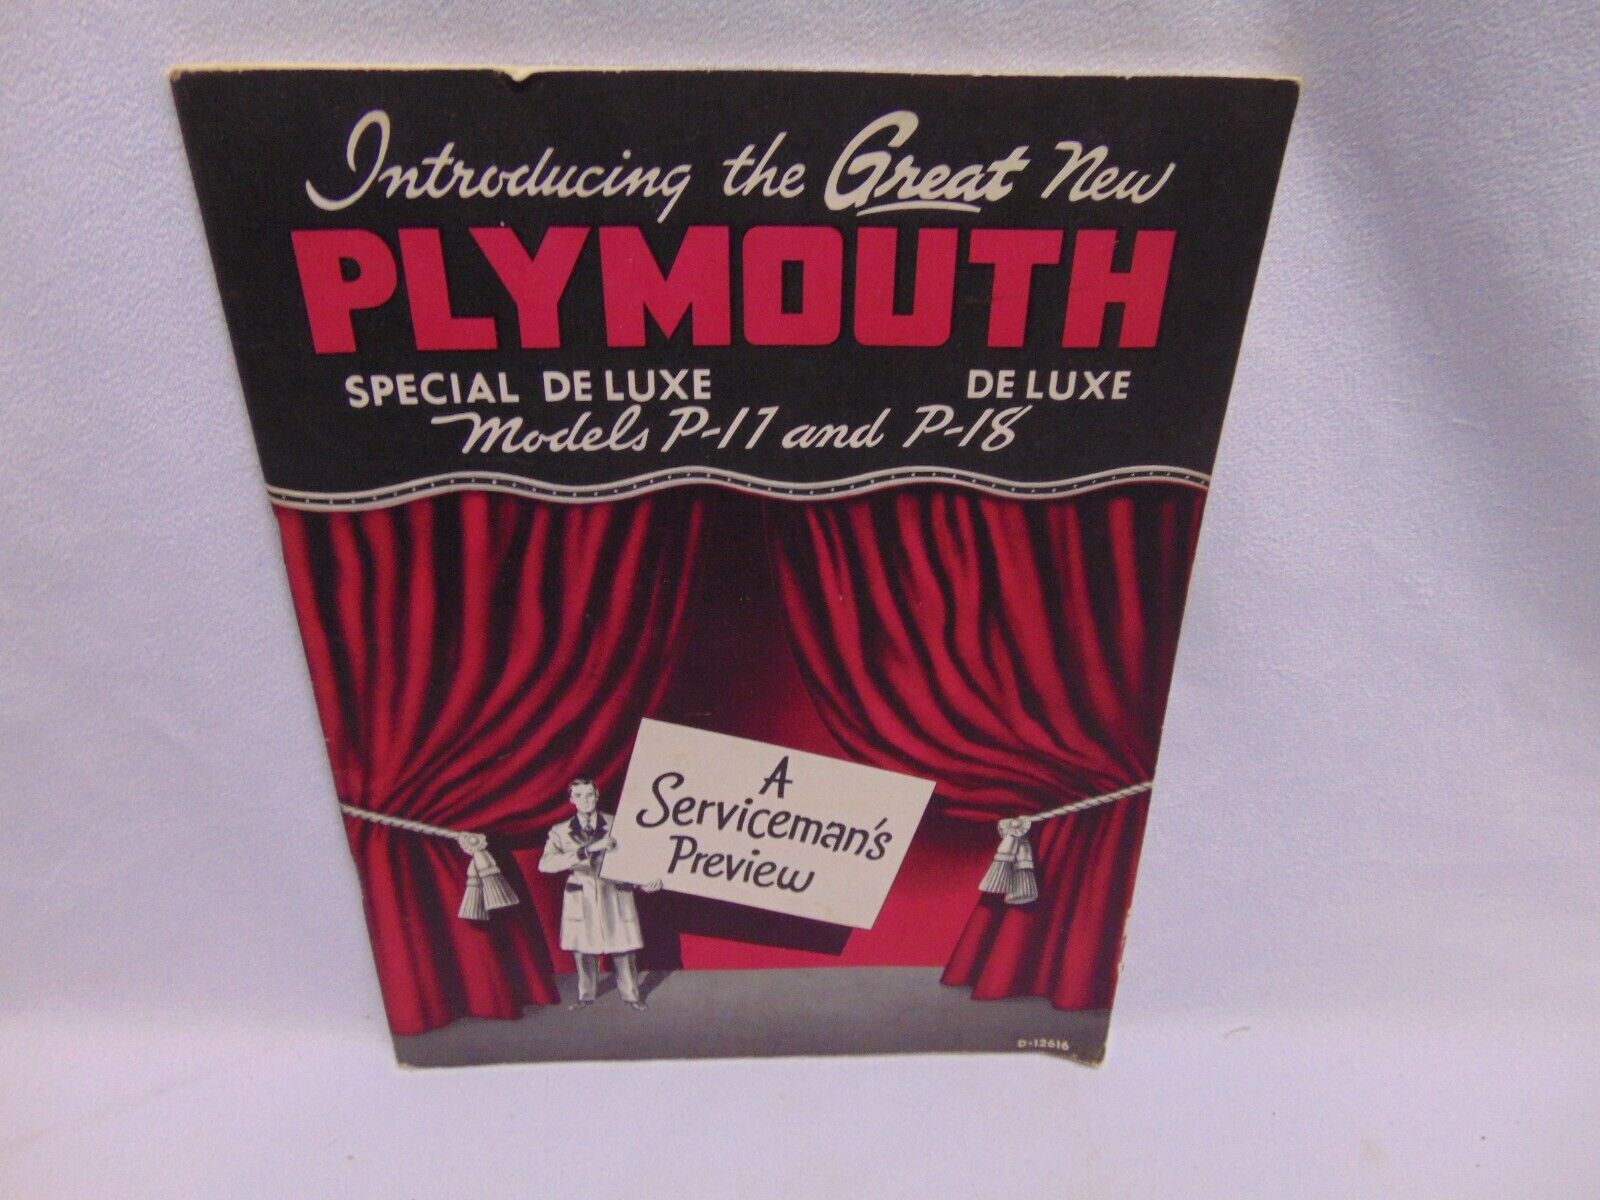 1949 Great New Plymouth serviceman preview Special De Luxe P-17 18 D-12616 49 pg